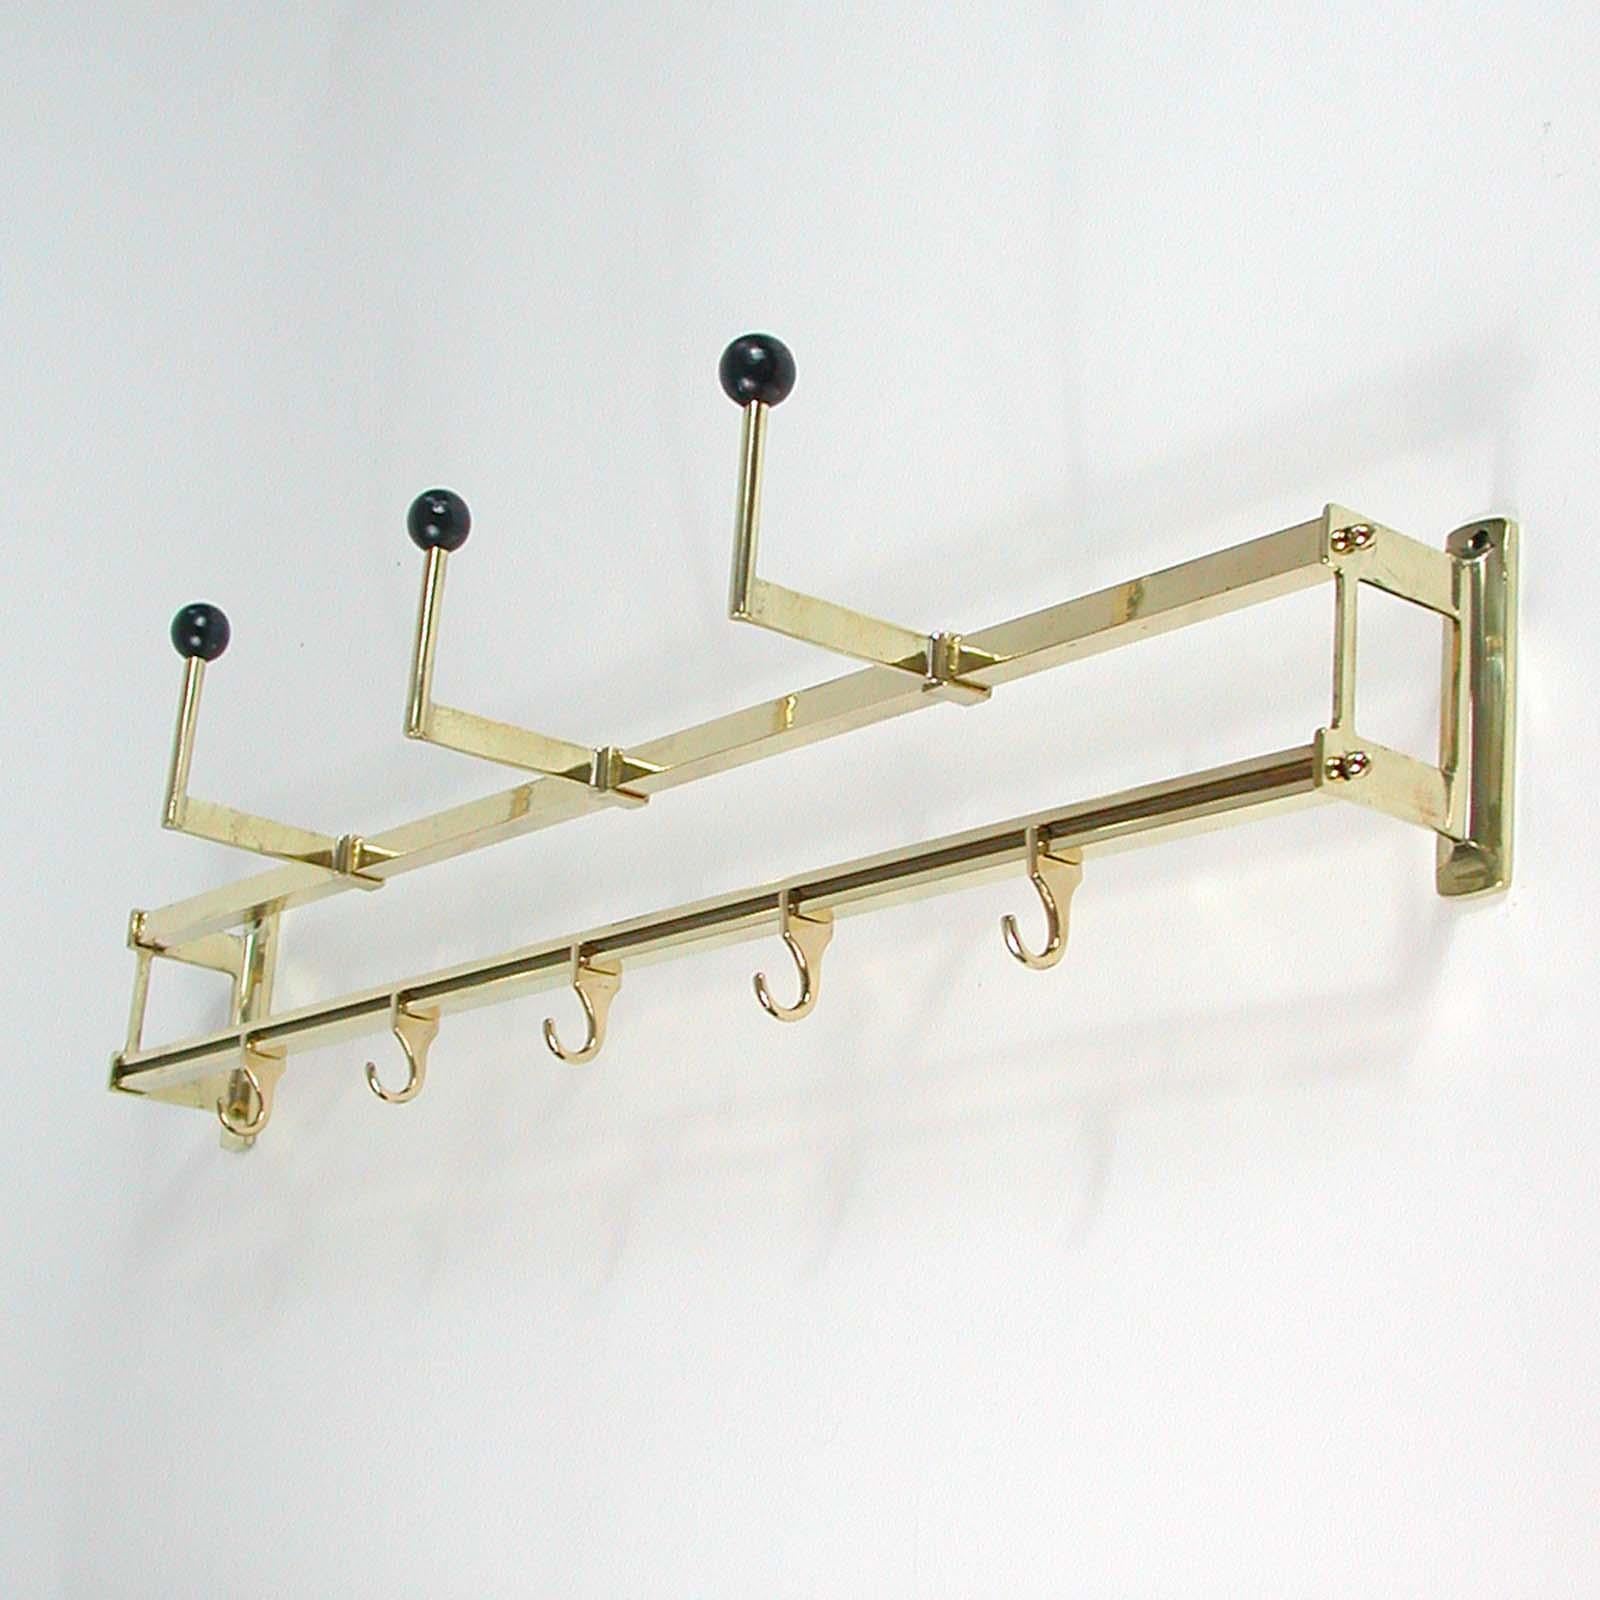 This vintage coat and hat rack was made in Germany in the 1930s during the Art Deco / Bauhaus period. It is made of brass, has got five movable hooks in the lower part and three black lacquered wooden hooks in the upper part.

Condition is good